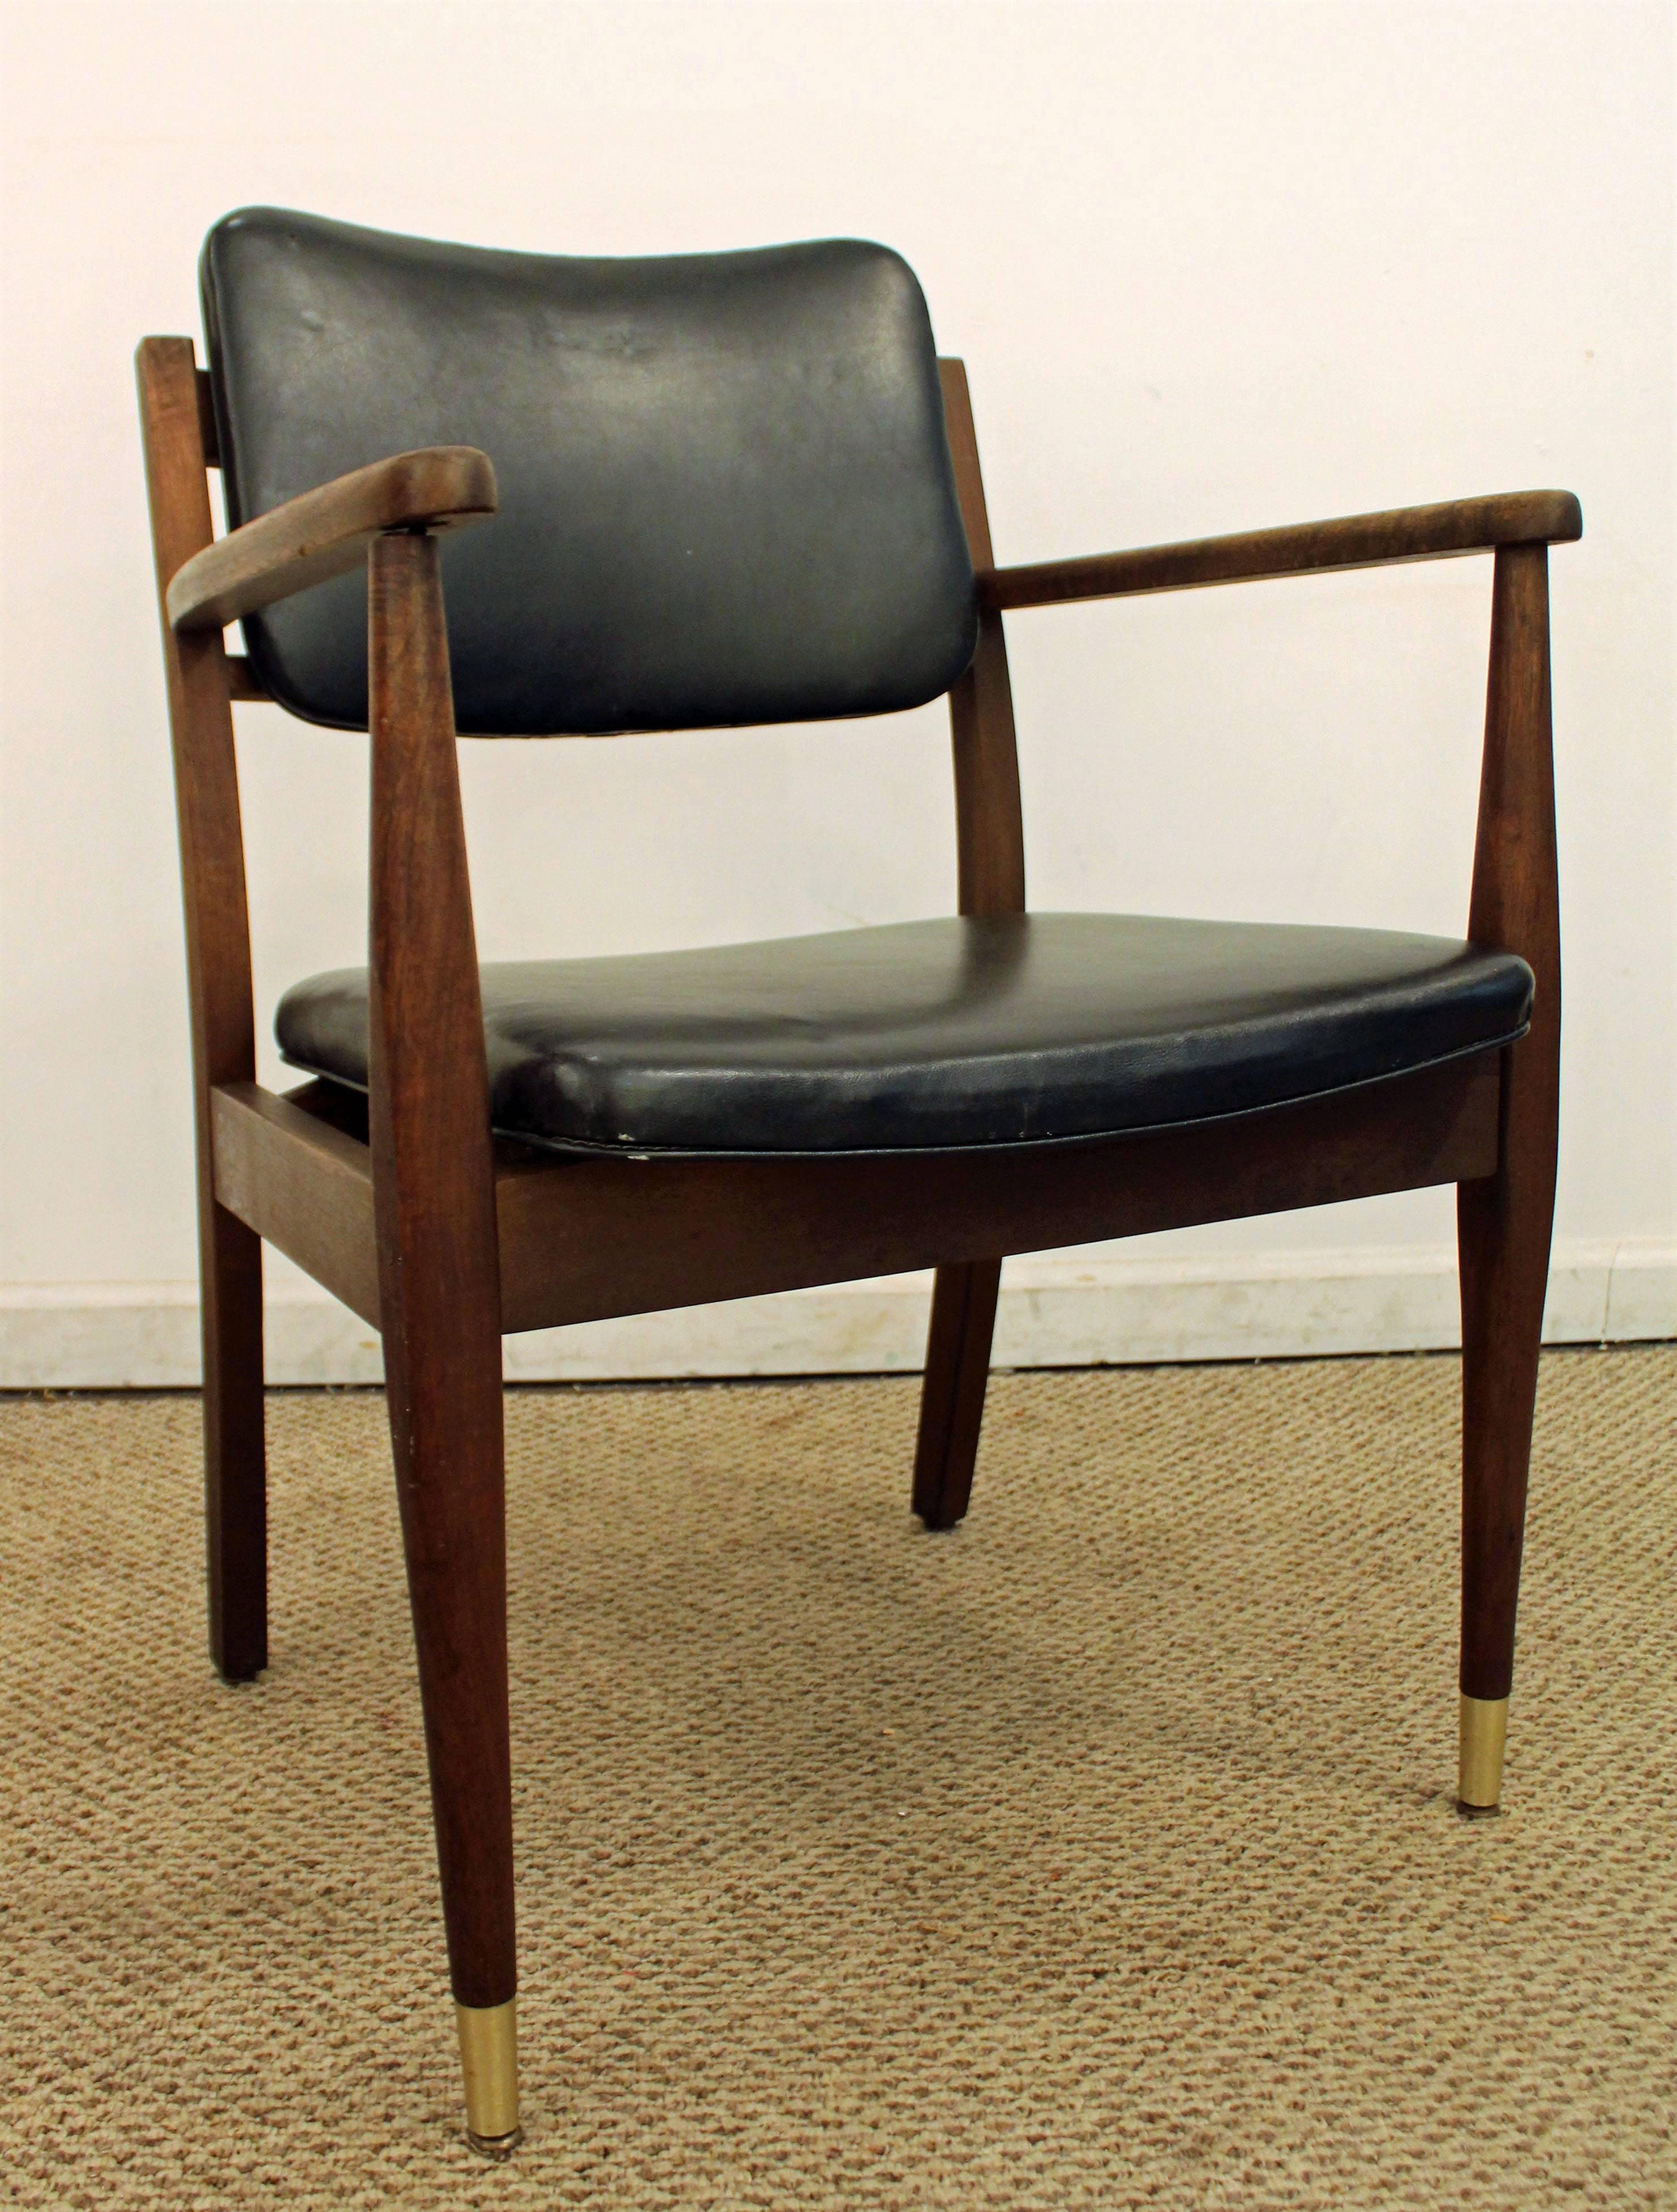 This open-armchair has a walnut frame, brass feet, and vinyl upholstery, in good condition for its age. It was made by Gregson Manufacturing Co.

Measure: 24